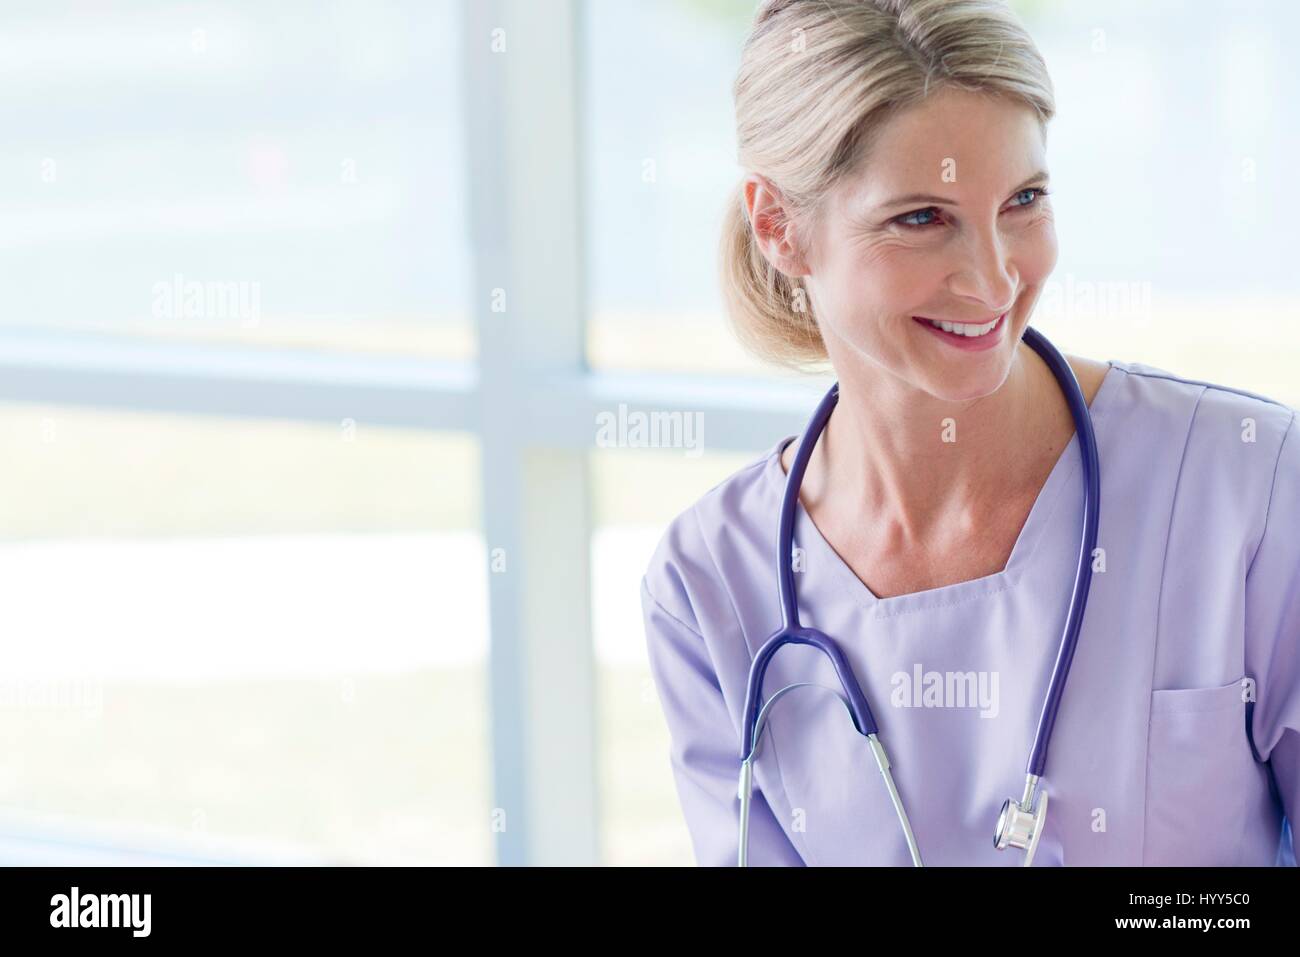 Care worker smiling. Stock Photo